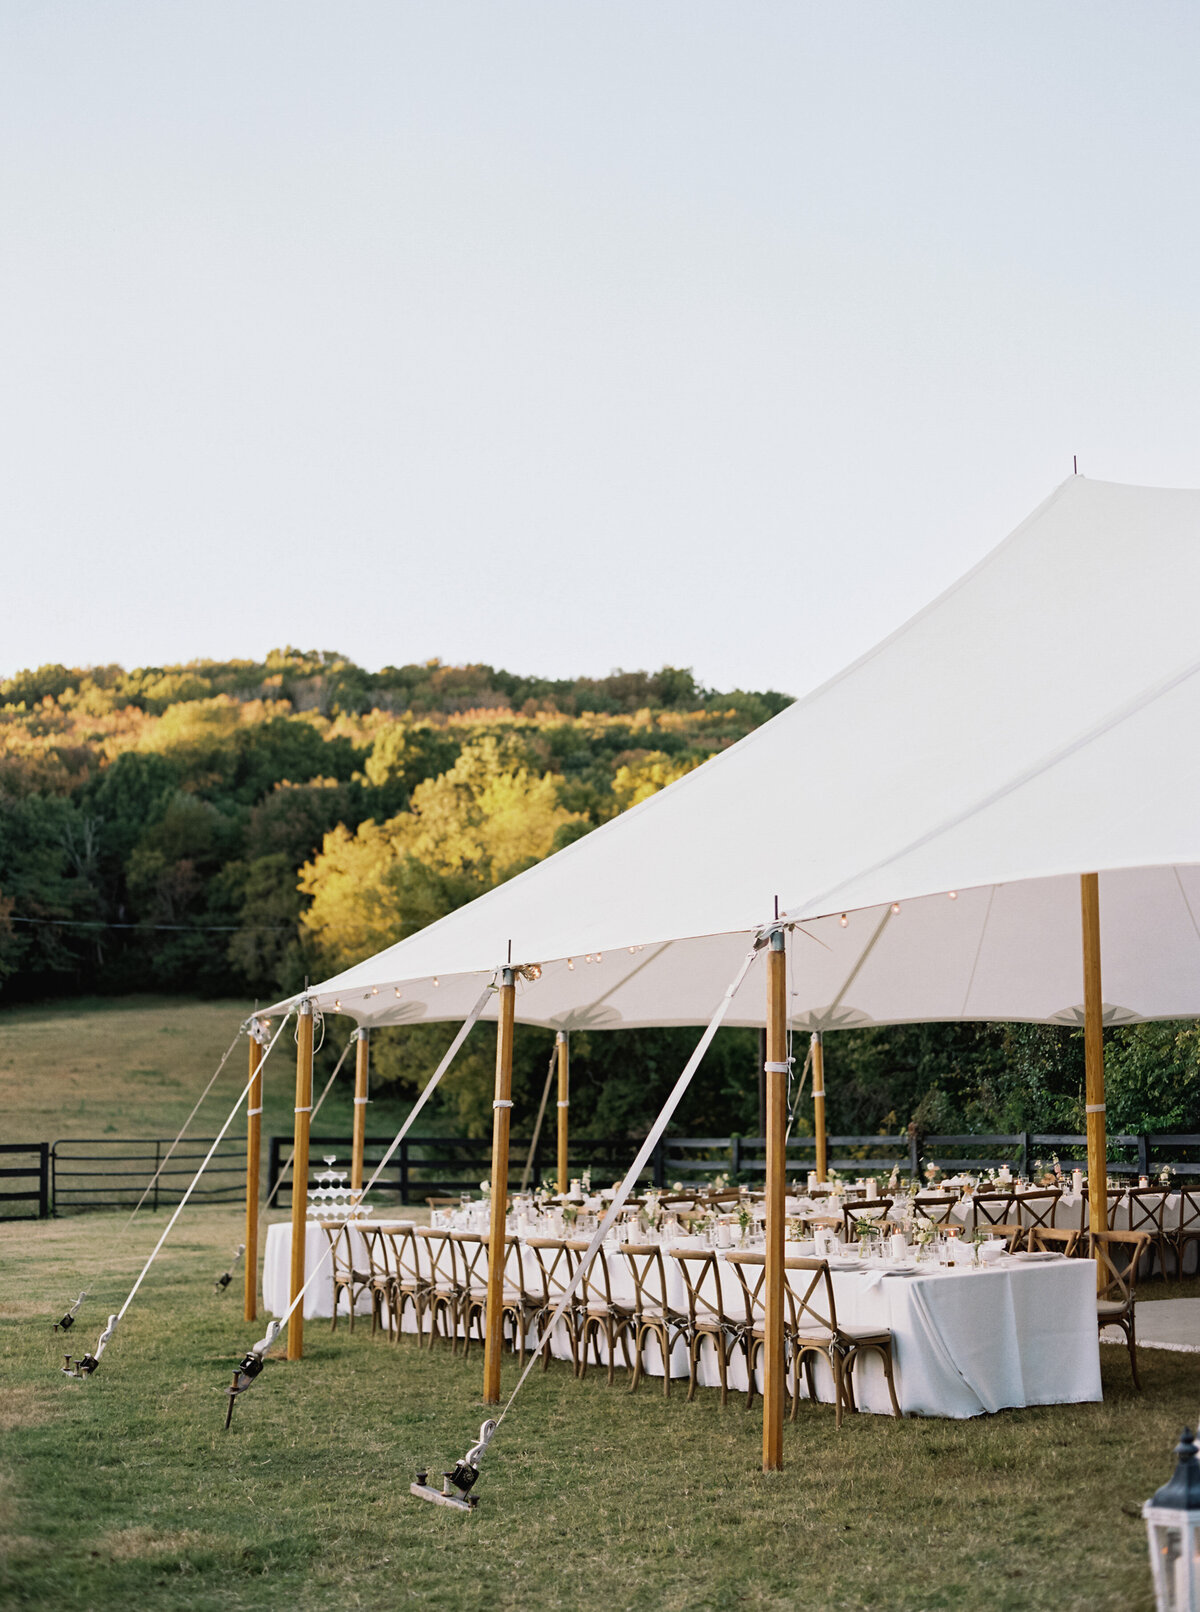 Bloomsbury-Farm-Ceremony-Sperry-Tent-Reception-Cross-back-chair-white-linen